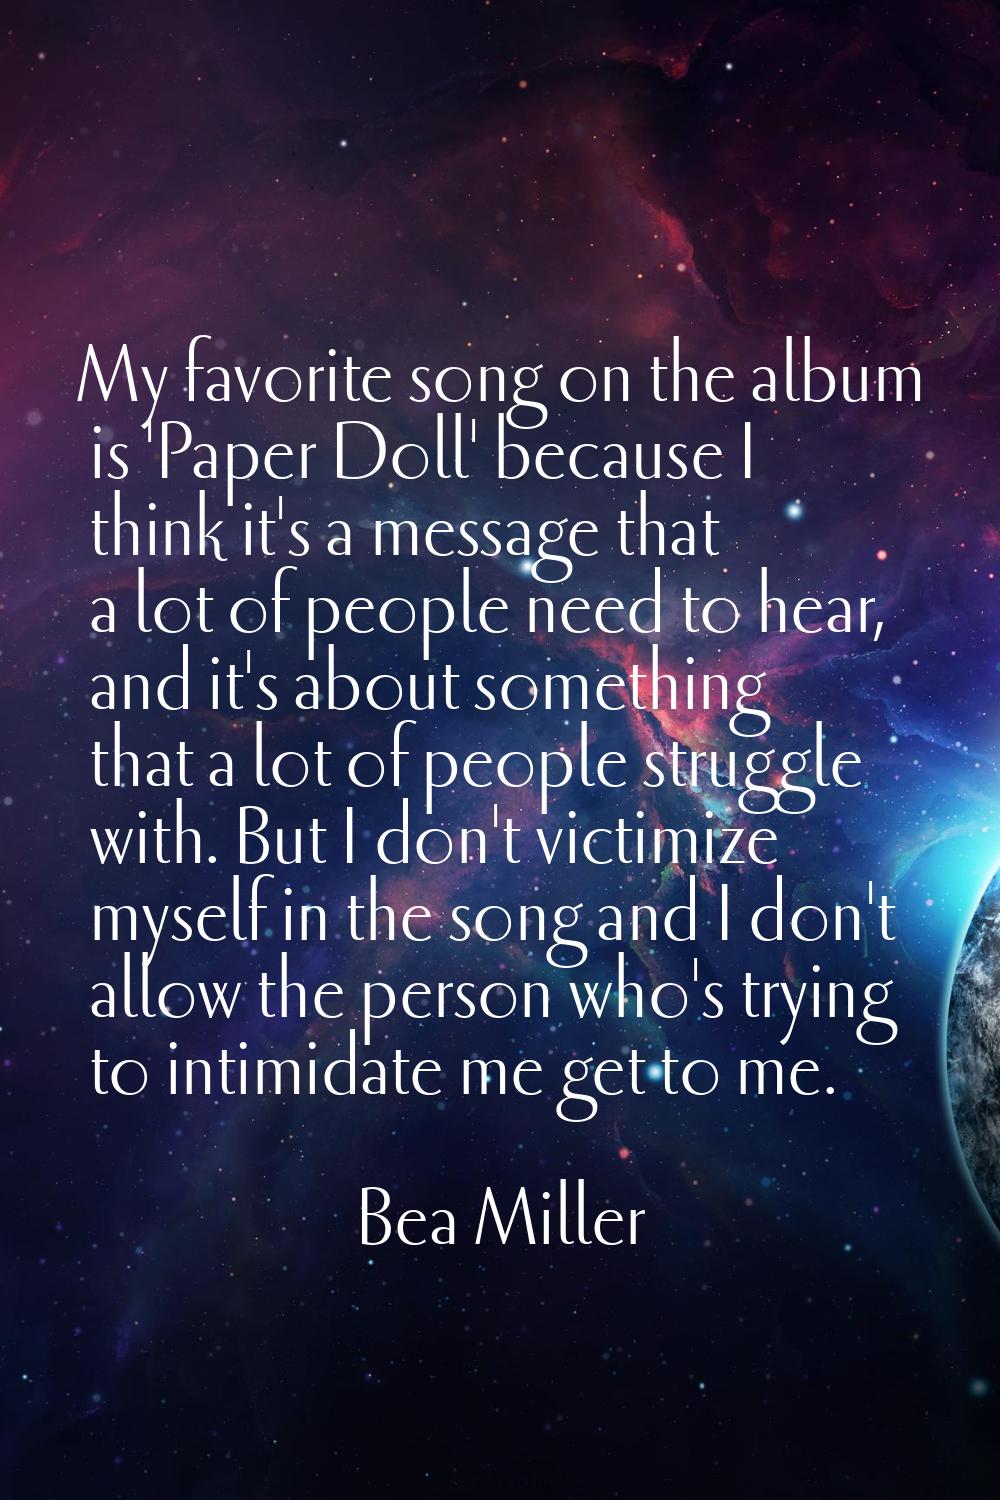 My favorite song on the album is 'Paper Doll' because I think it's a message that a lot of people n